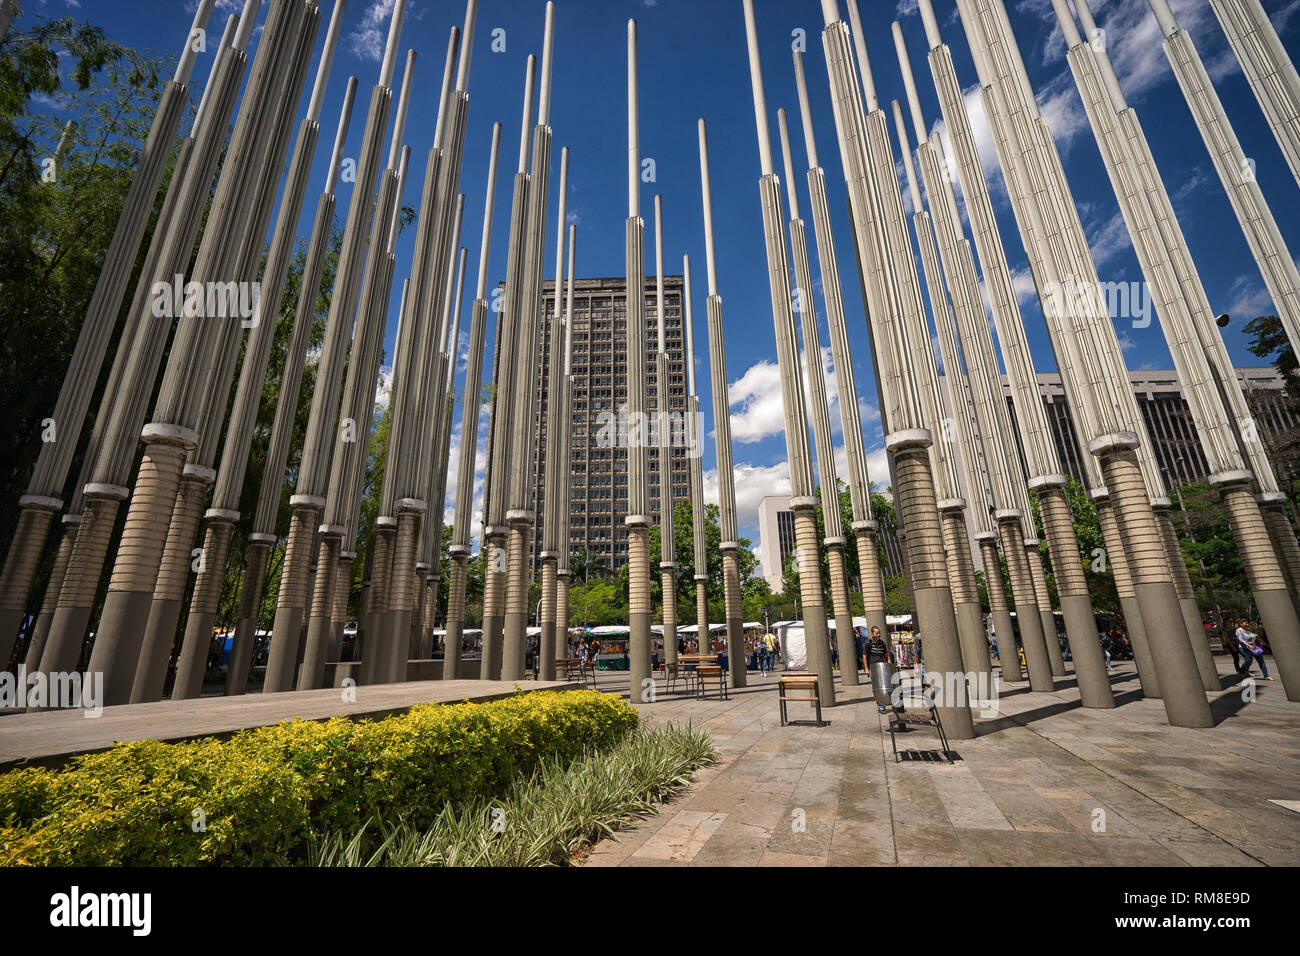 Medellin, Colombia - July 25, 2018: concrete light stands of the  Plaza Cisneros Stock Photo